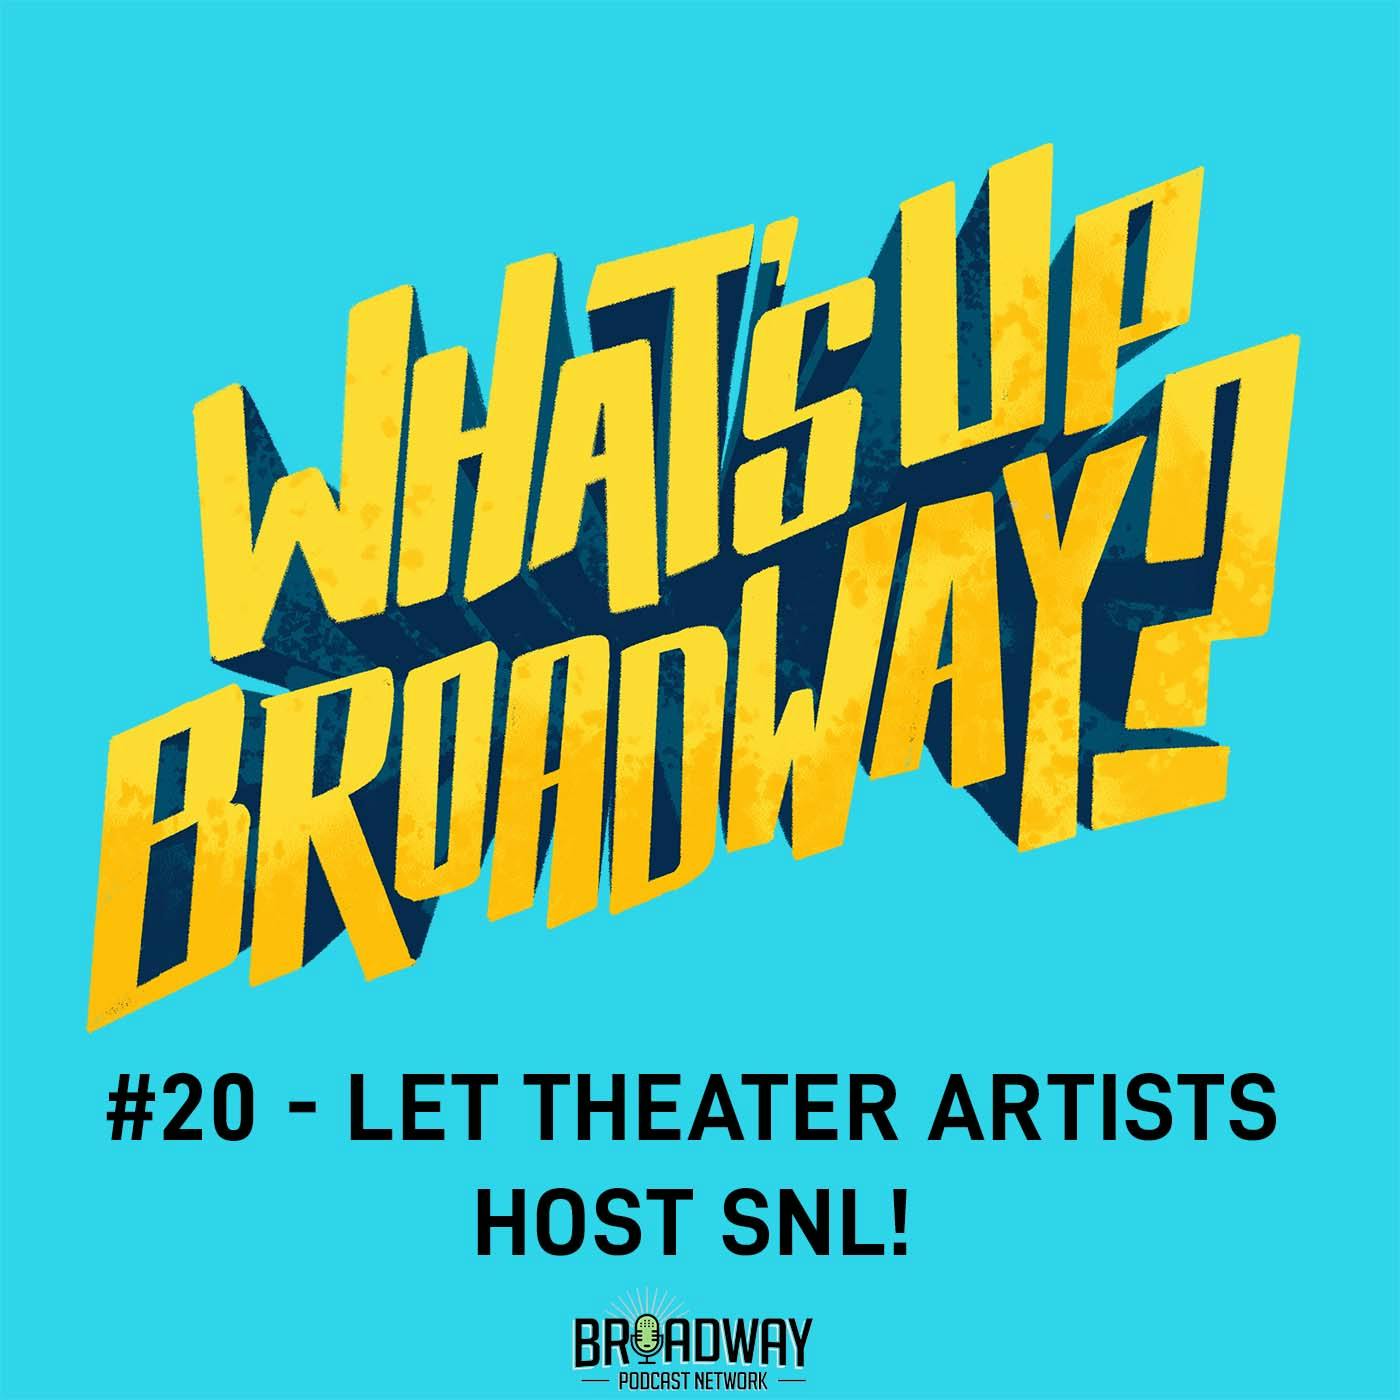 #20 - Let Theater Artists Host SNL!